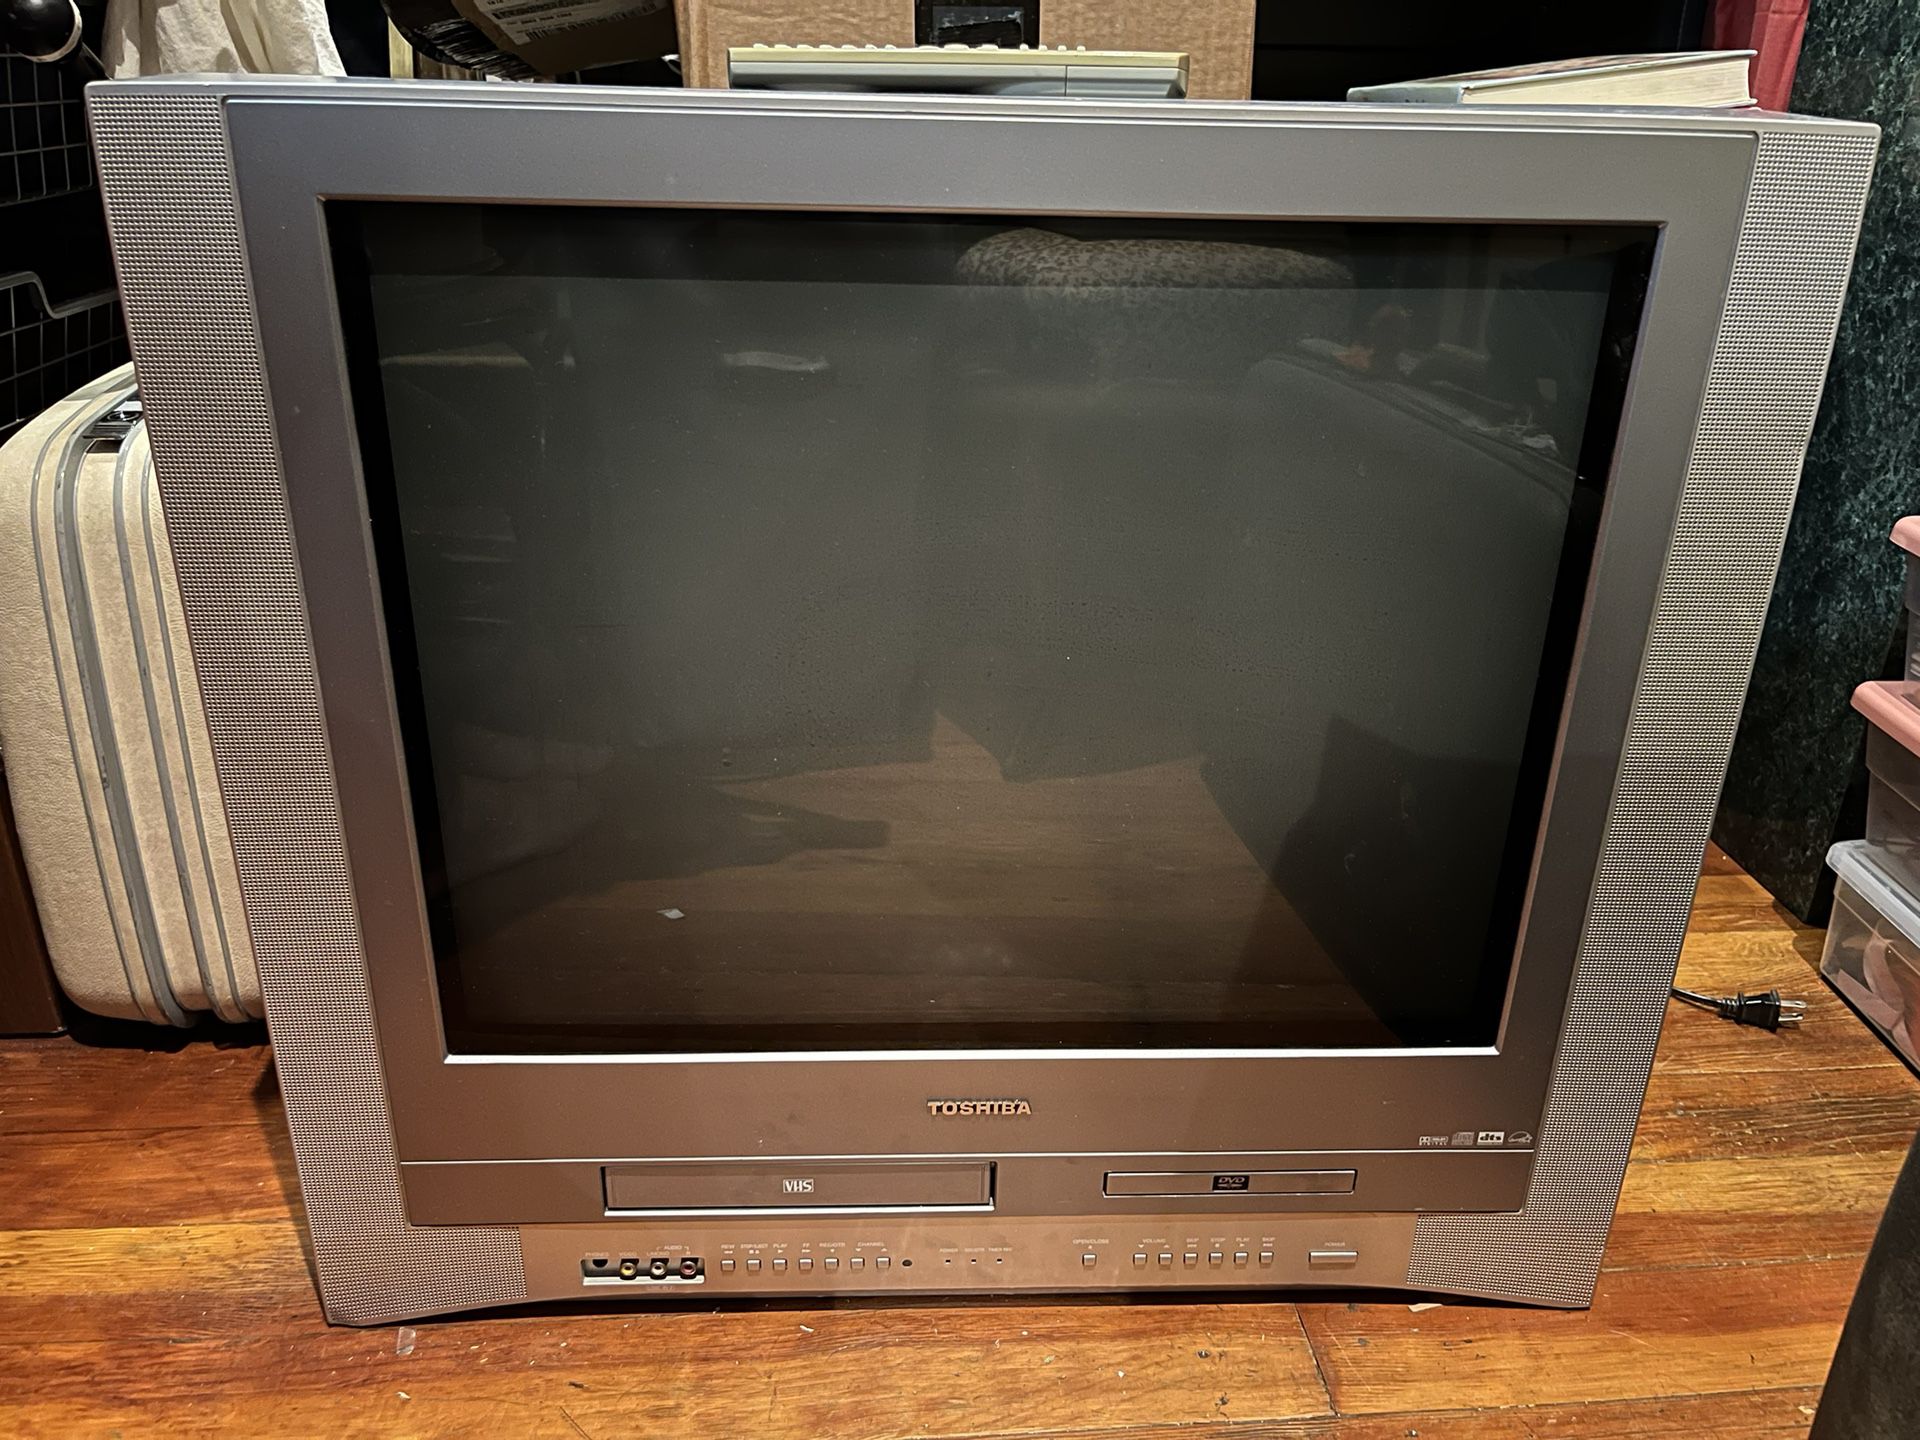 Toshiba MW24FN1 24” Combination Flat Color TV, VCR, DVD with remote.